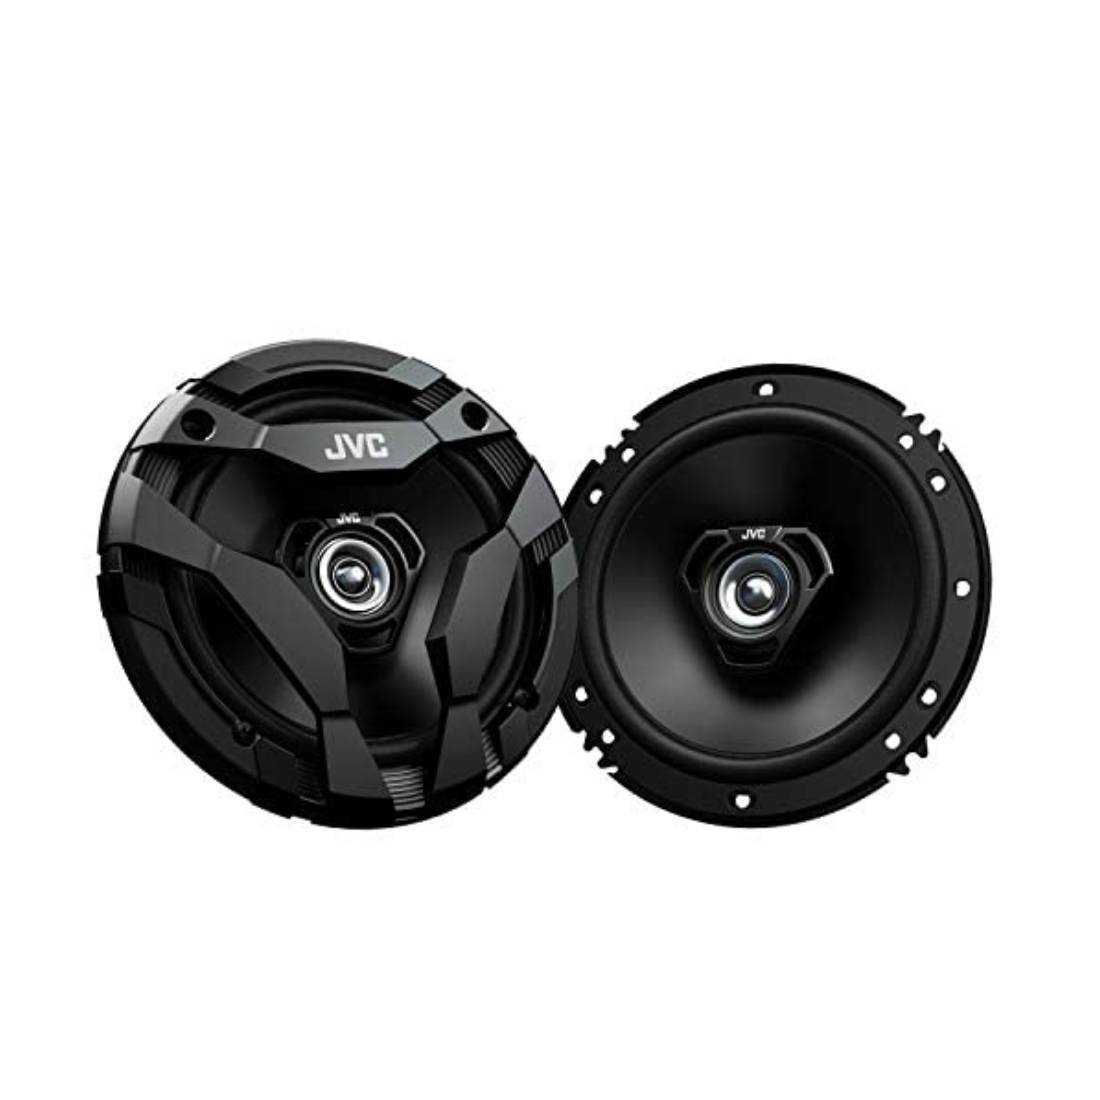 JVC CS-DF620 300 Watts Max 6.5" 4 Ohms 2-Way Mobile DRVN DF Series Stereo Car Audio Coaxial Speakers